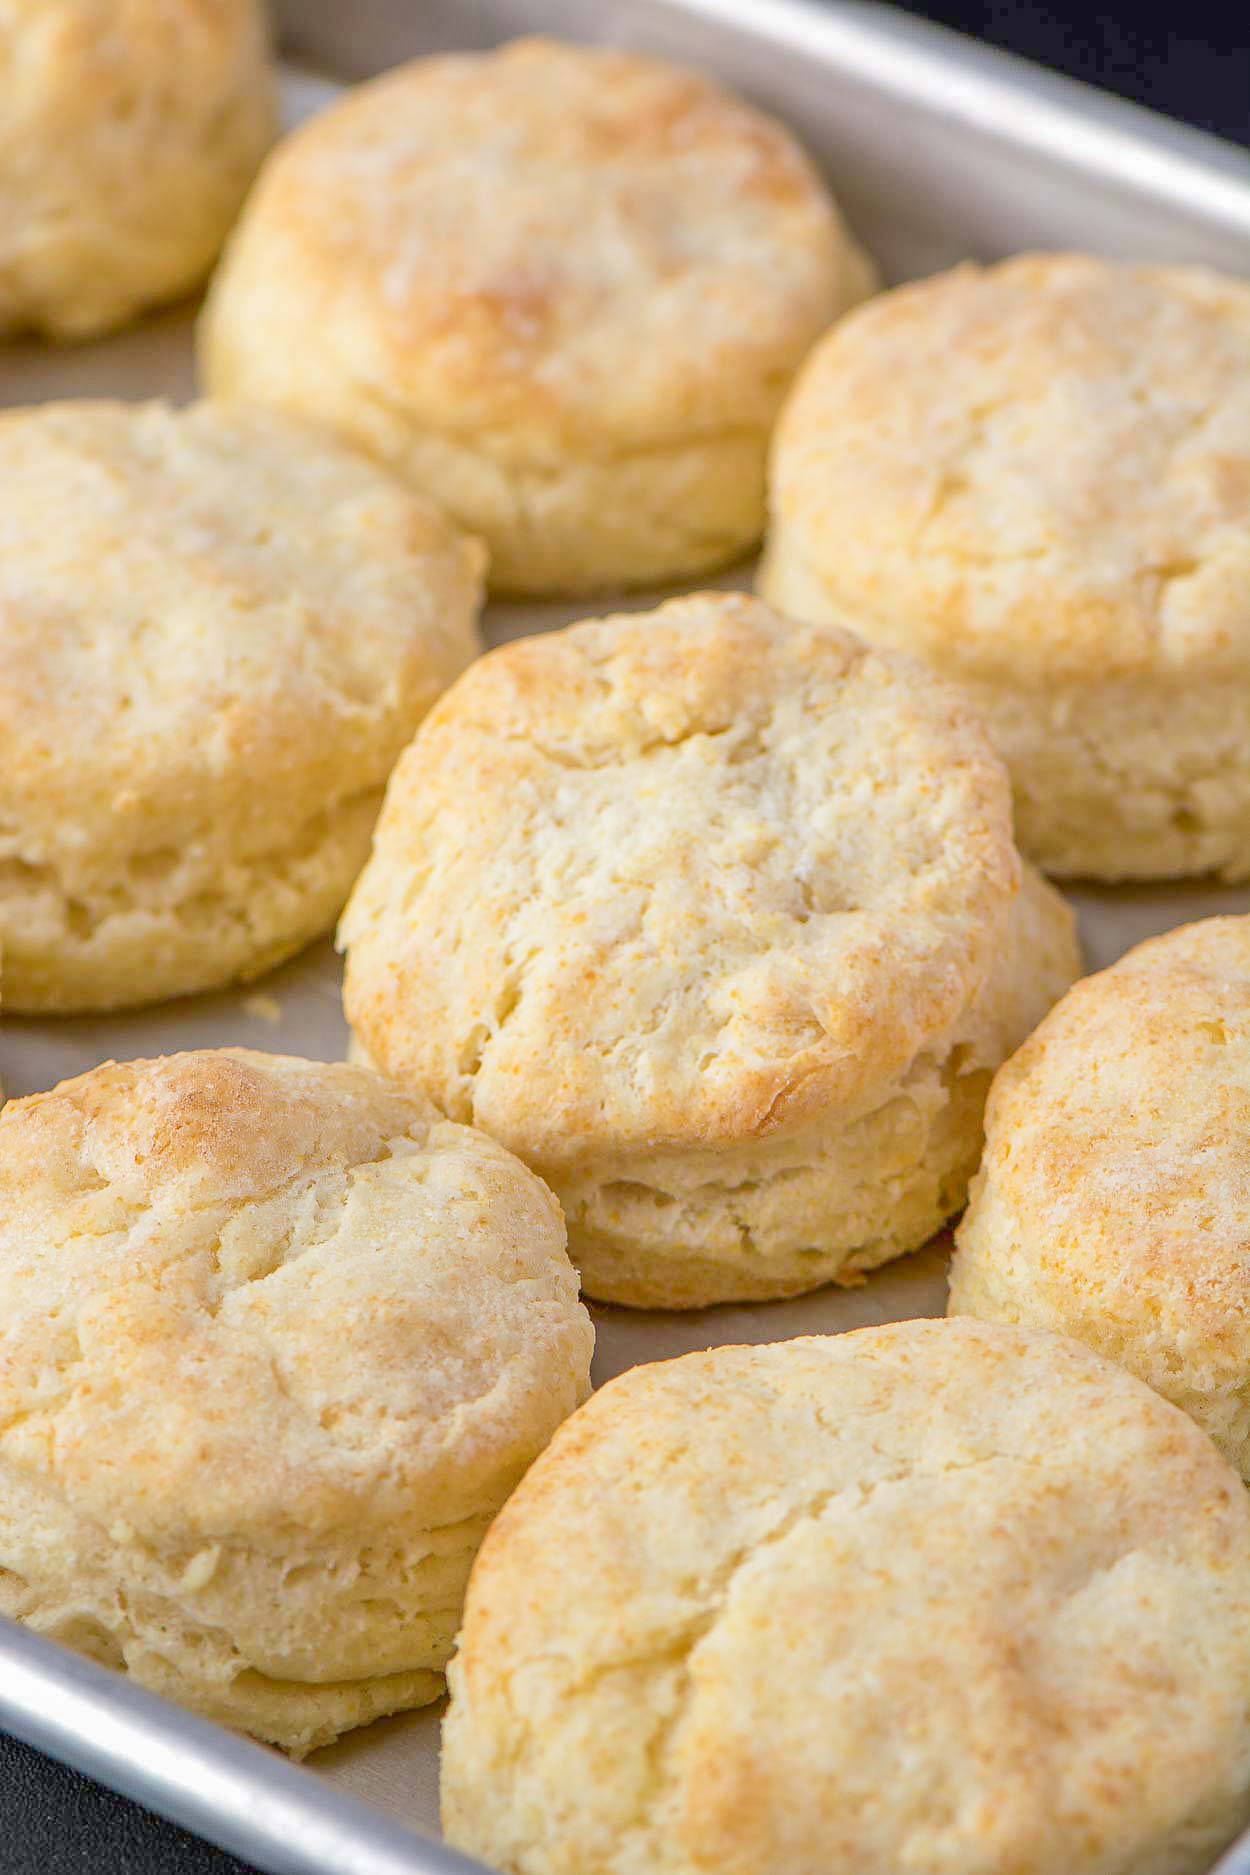 Made from scratch biscuits